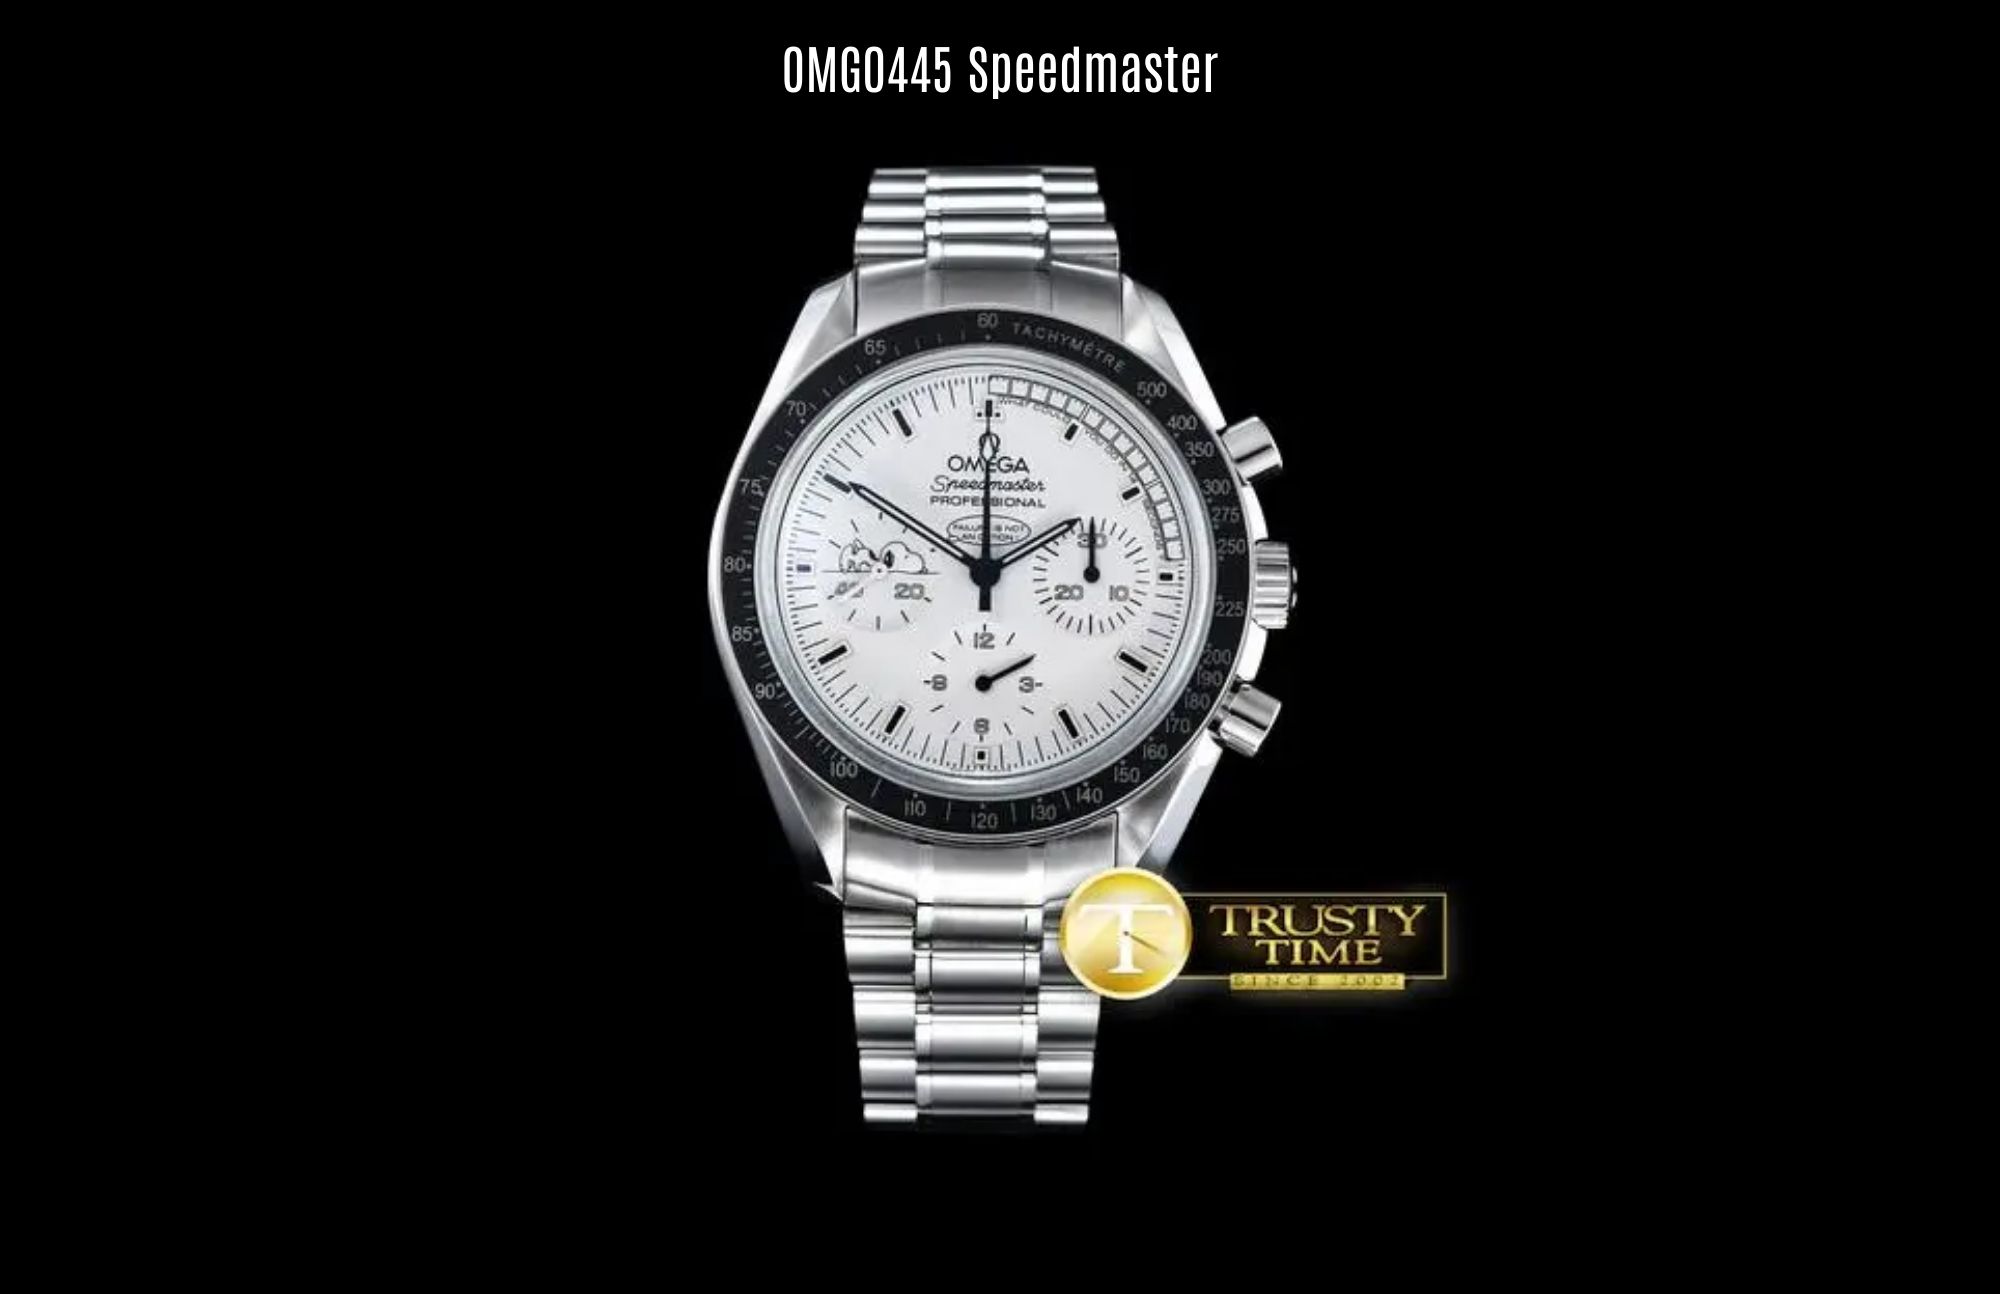 OMG0445 Speedmaster shows its stainless steel link bracelet and white dial